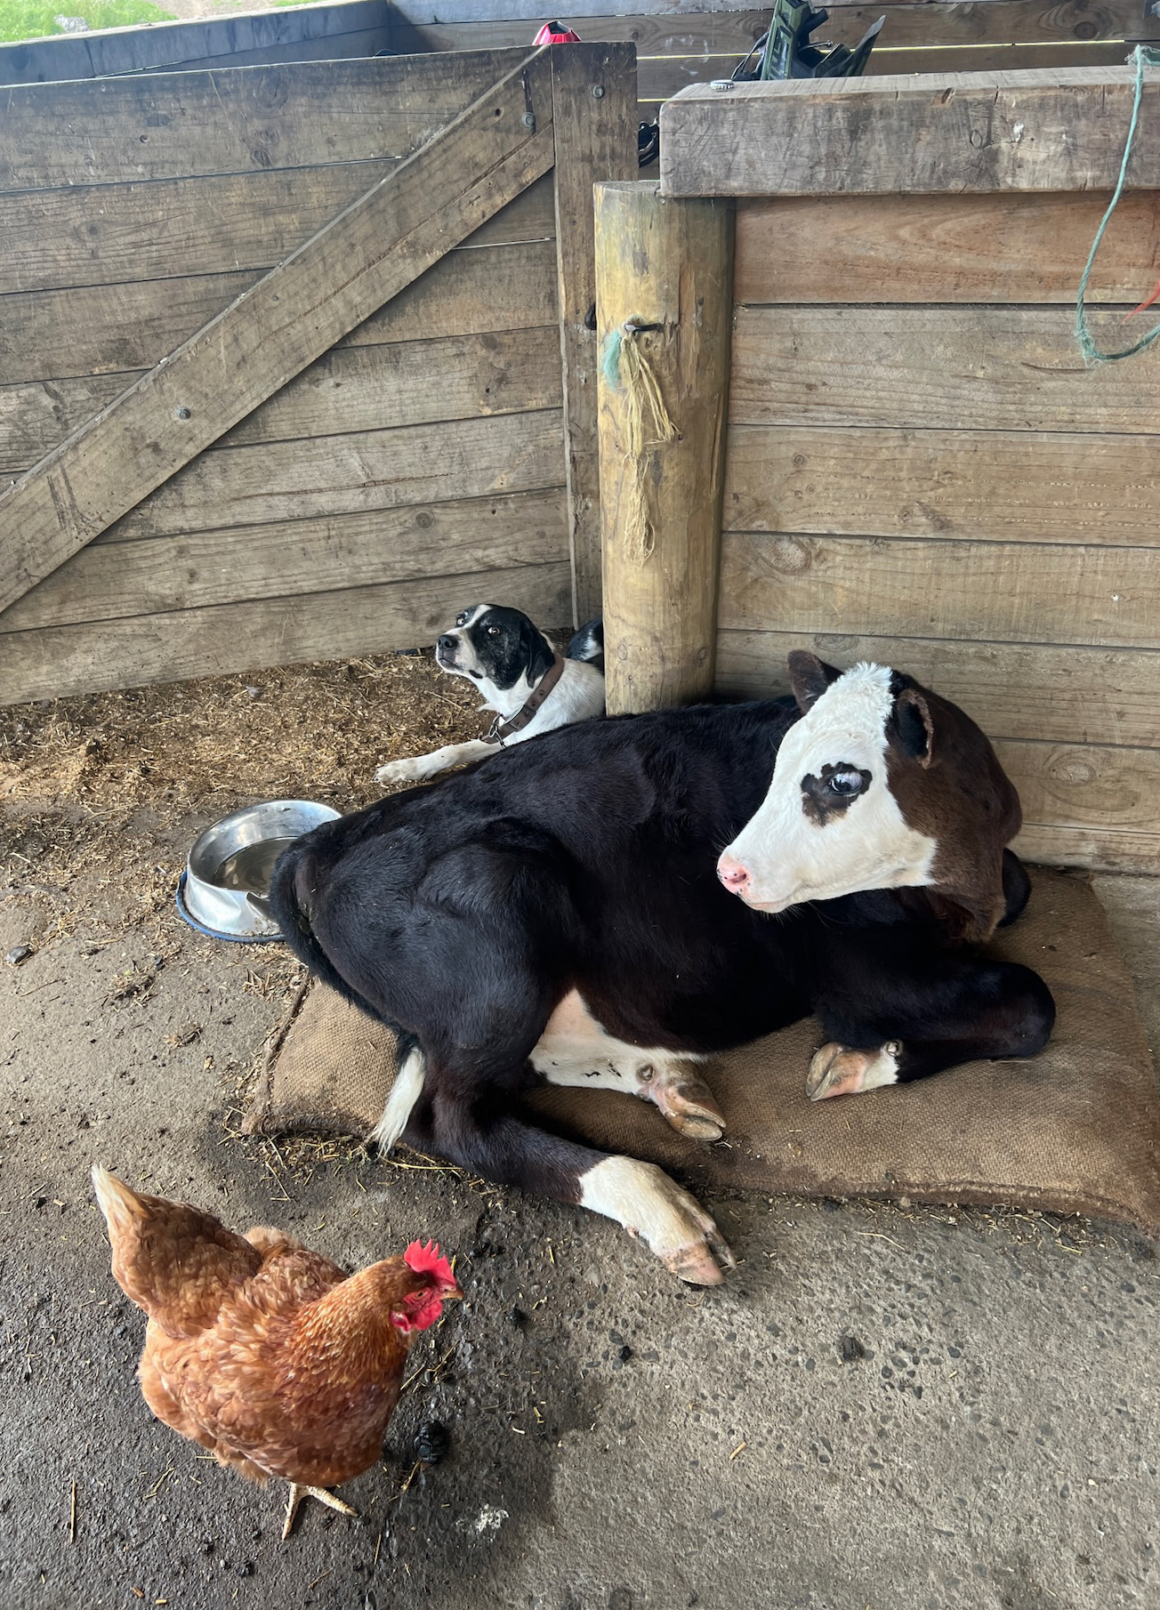 Poor Flash, our heading dog,
has had to give her bed away to
a calf who found a comfy spot!